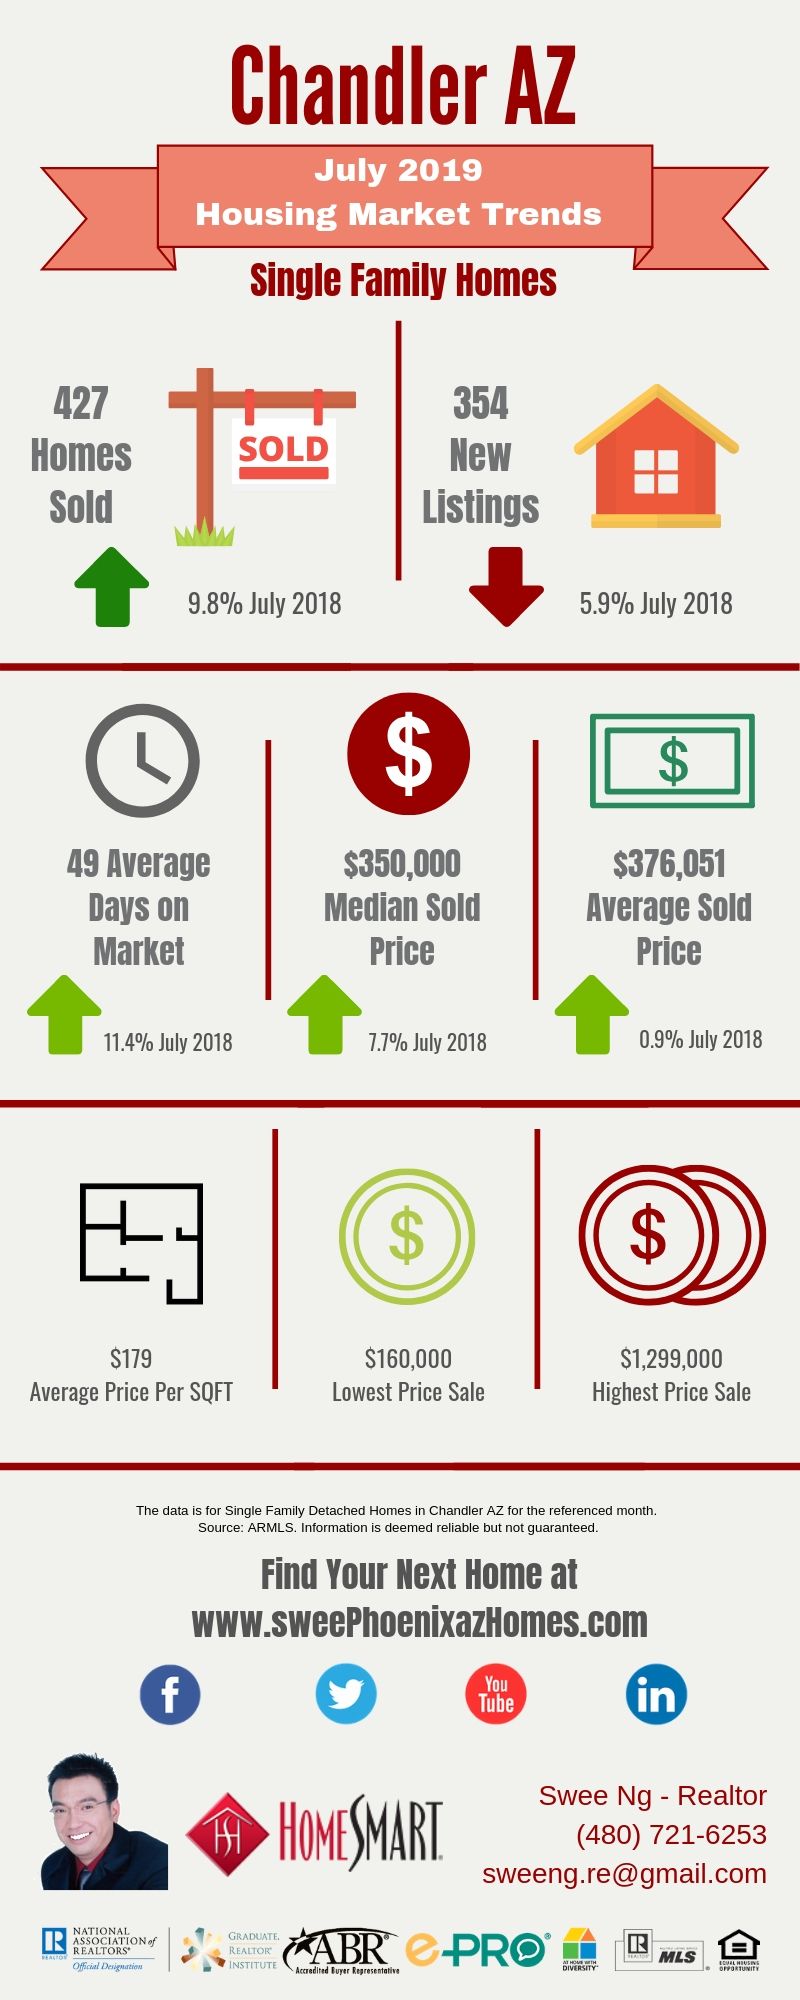 July 2019 Chandler AZ Housing Market Update by Swee Ng, House Value and Real Estate Listings